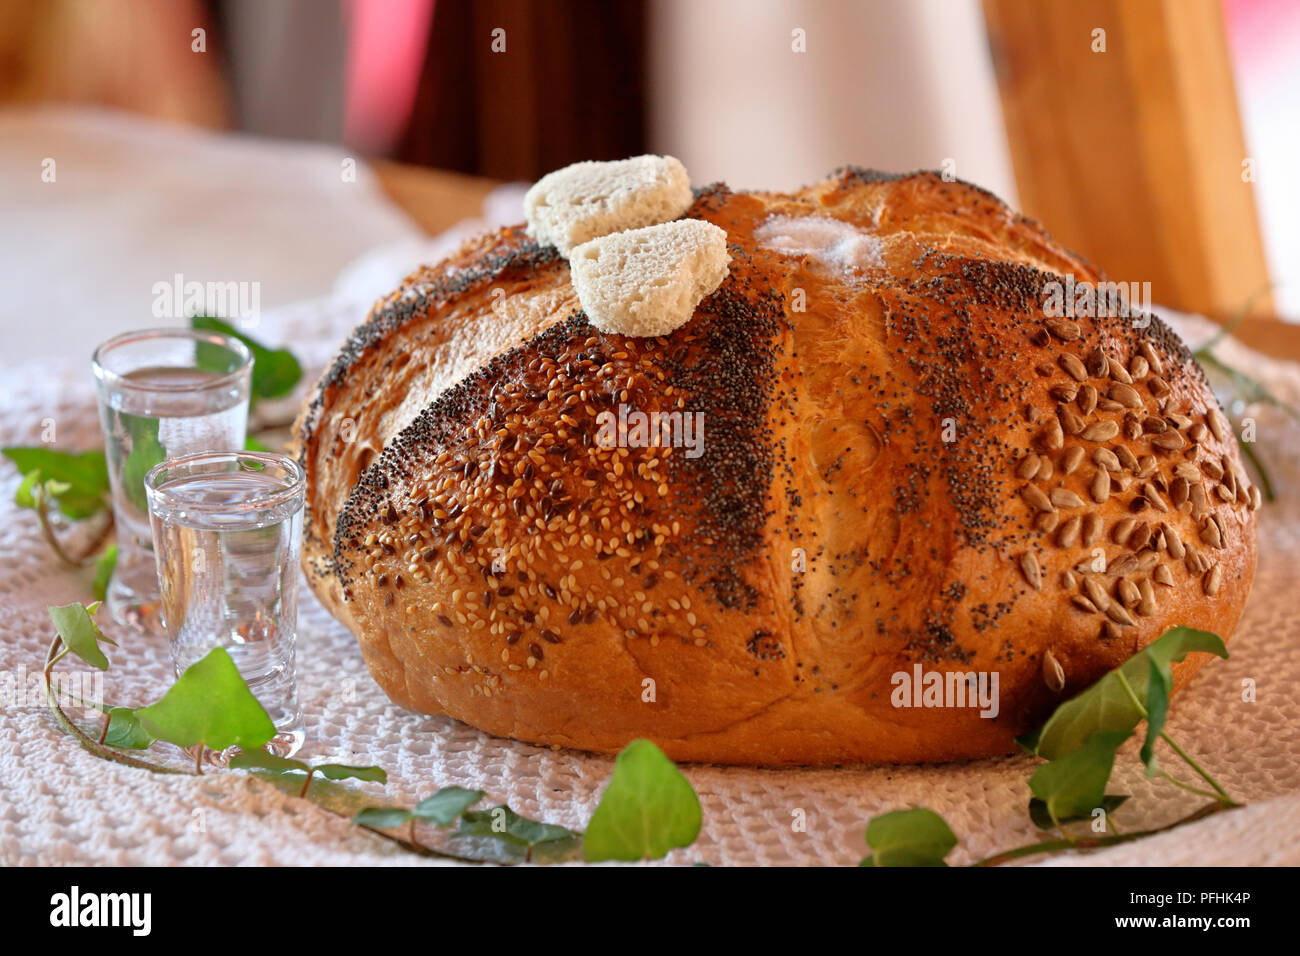 Round bread and vodka, a traditional greeting of a bride and groom Stock Photo